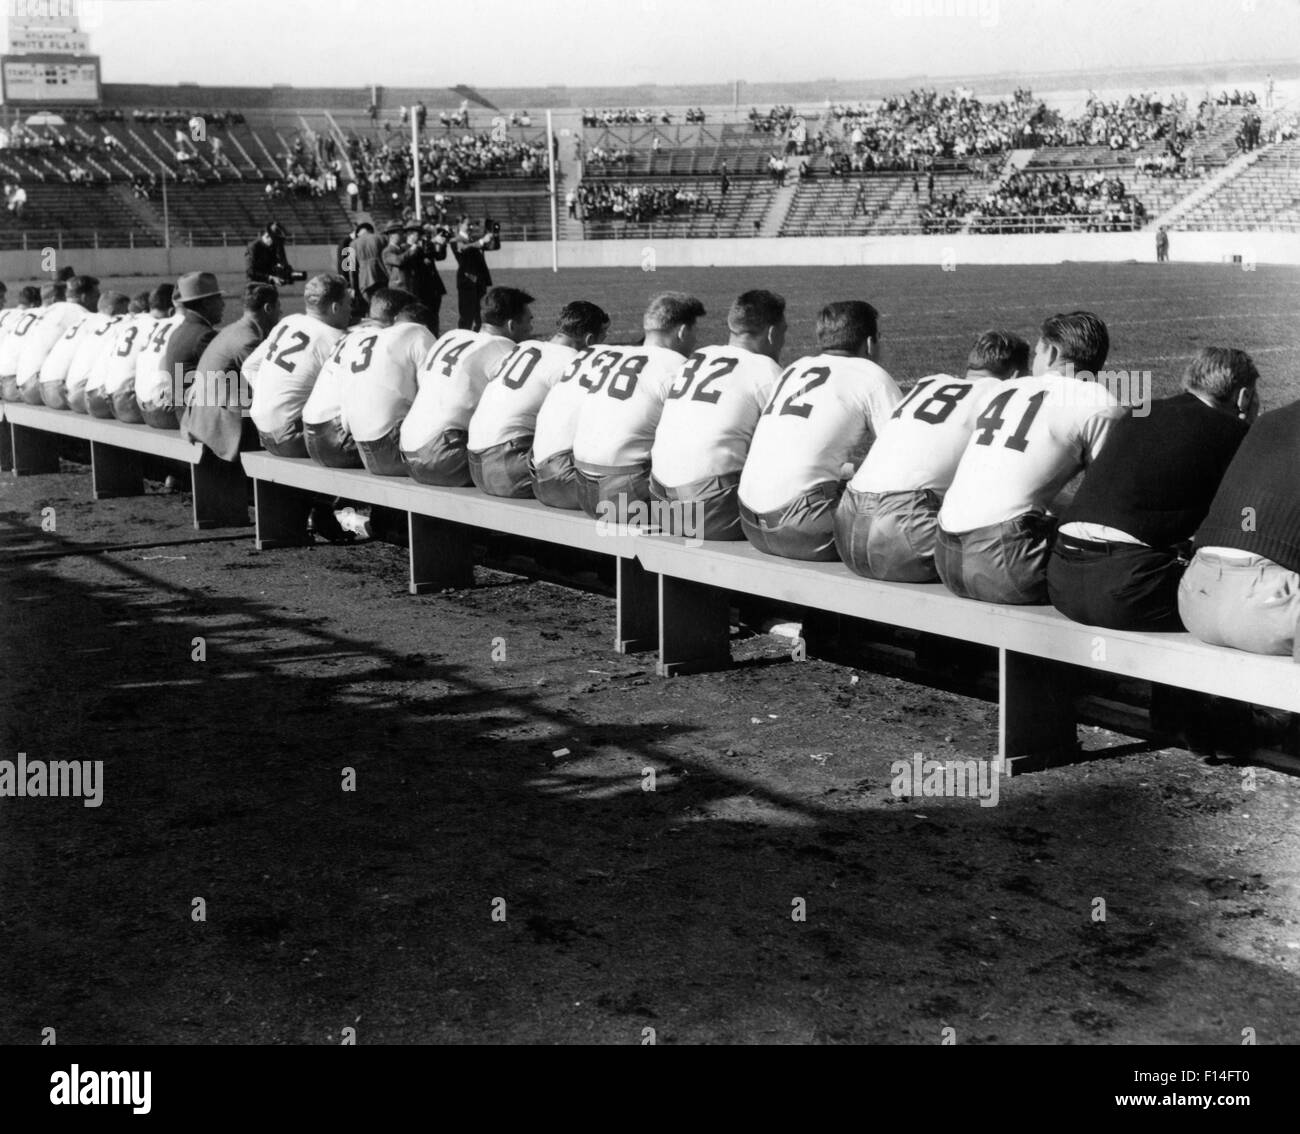 1940s HIGH SCHOOL OR COLLEGIATE FOOTBALL TEAMS FROM BEHIND ALL SITTING ON SIDELINE BENCHES Stock Photo